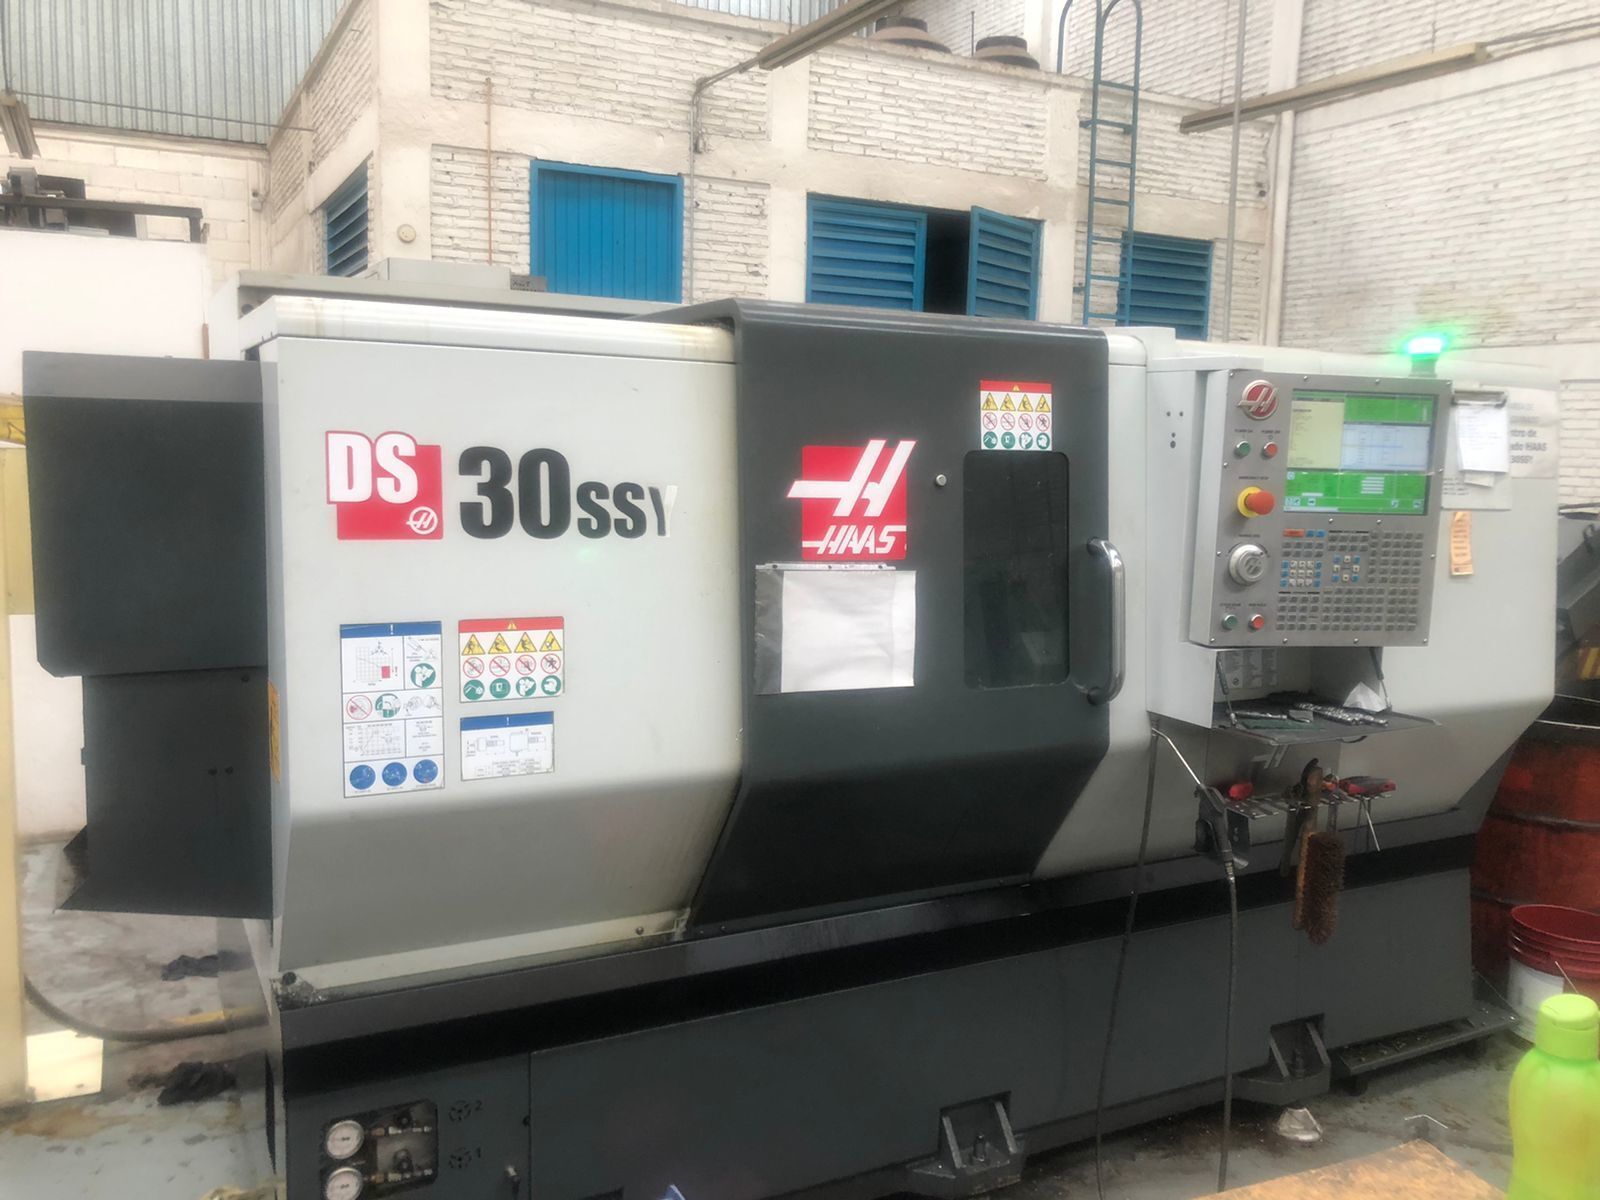 2016 HAAS DS-30SSY CNC Lathes | Toolquip, Inc.